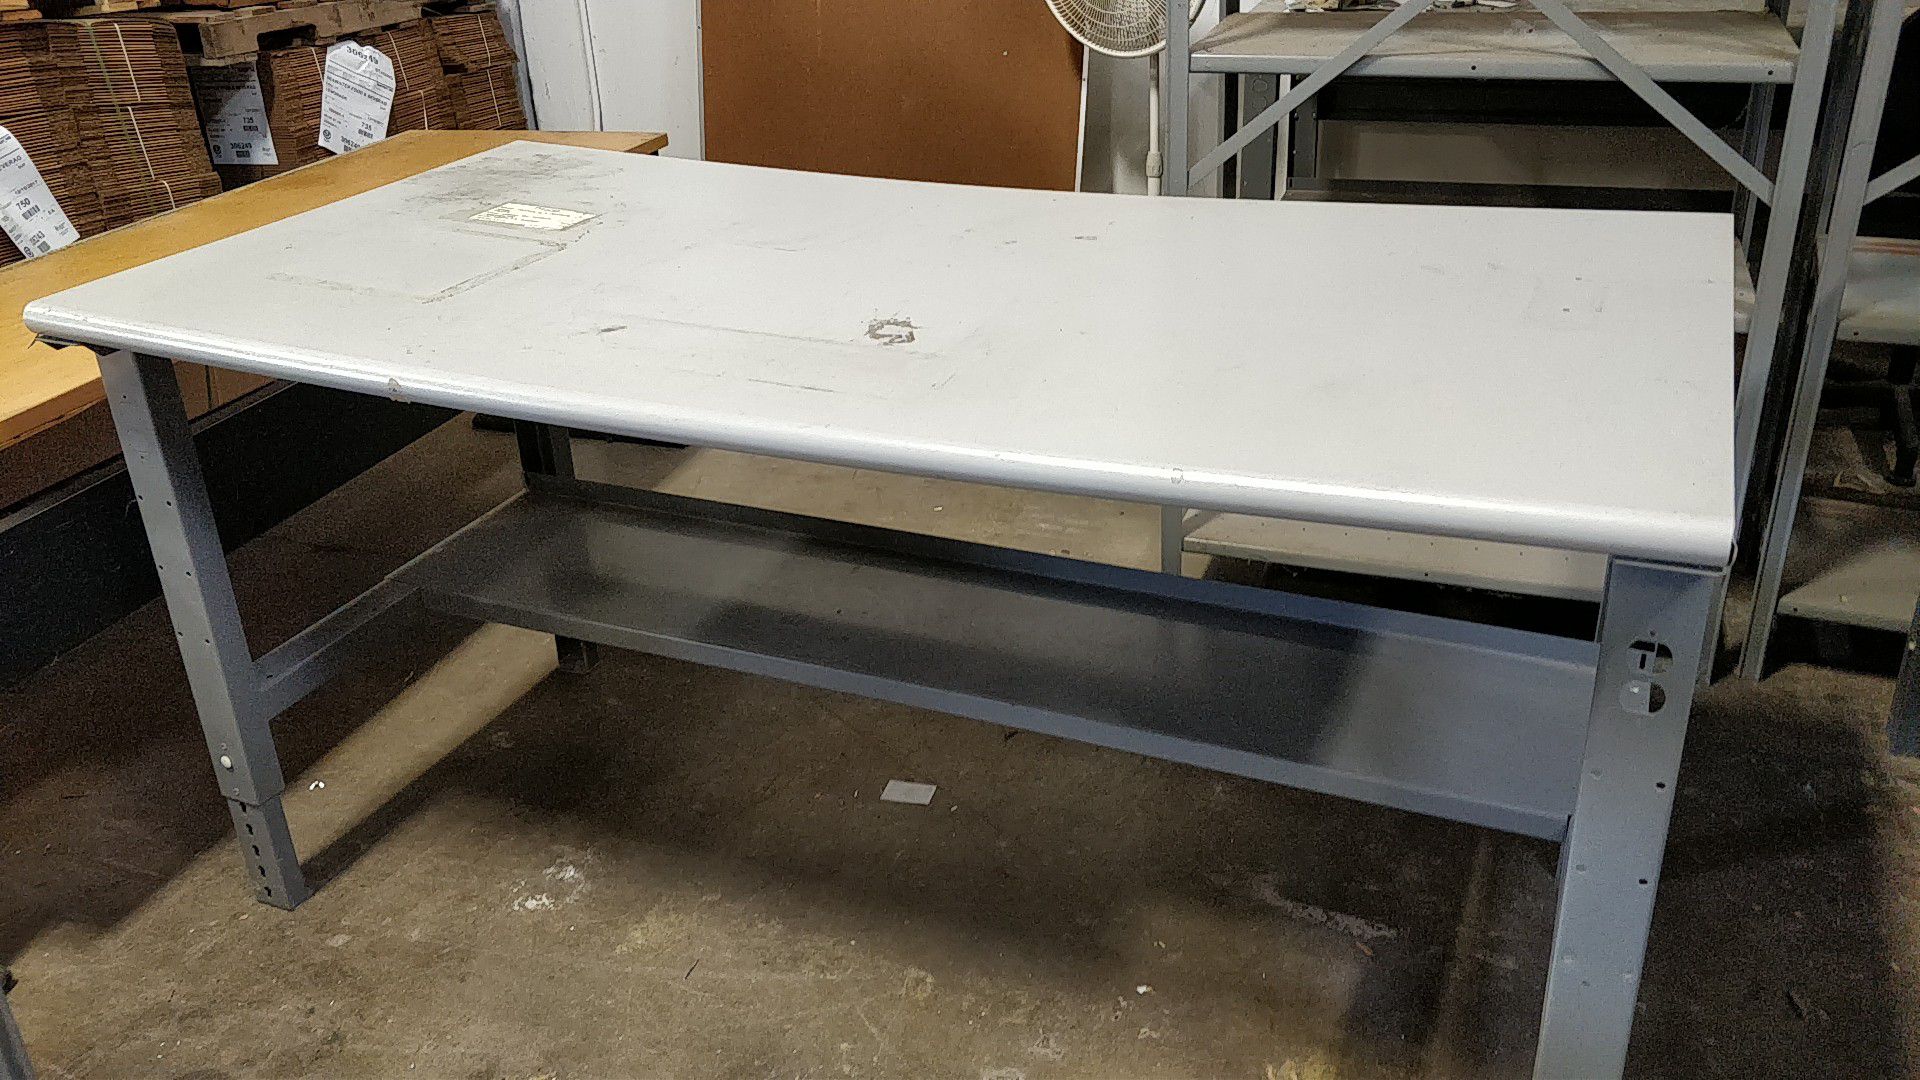 ULine Packing tables Used. These are $370 new!! Only asking $60 each